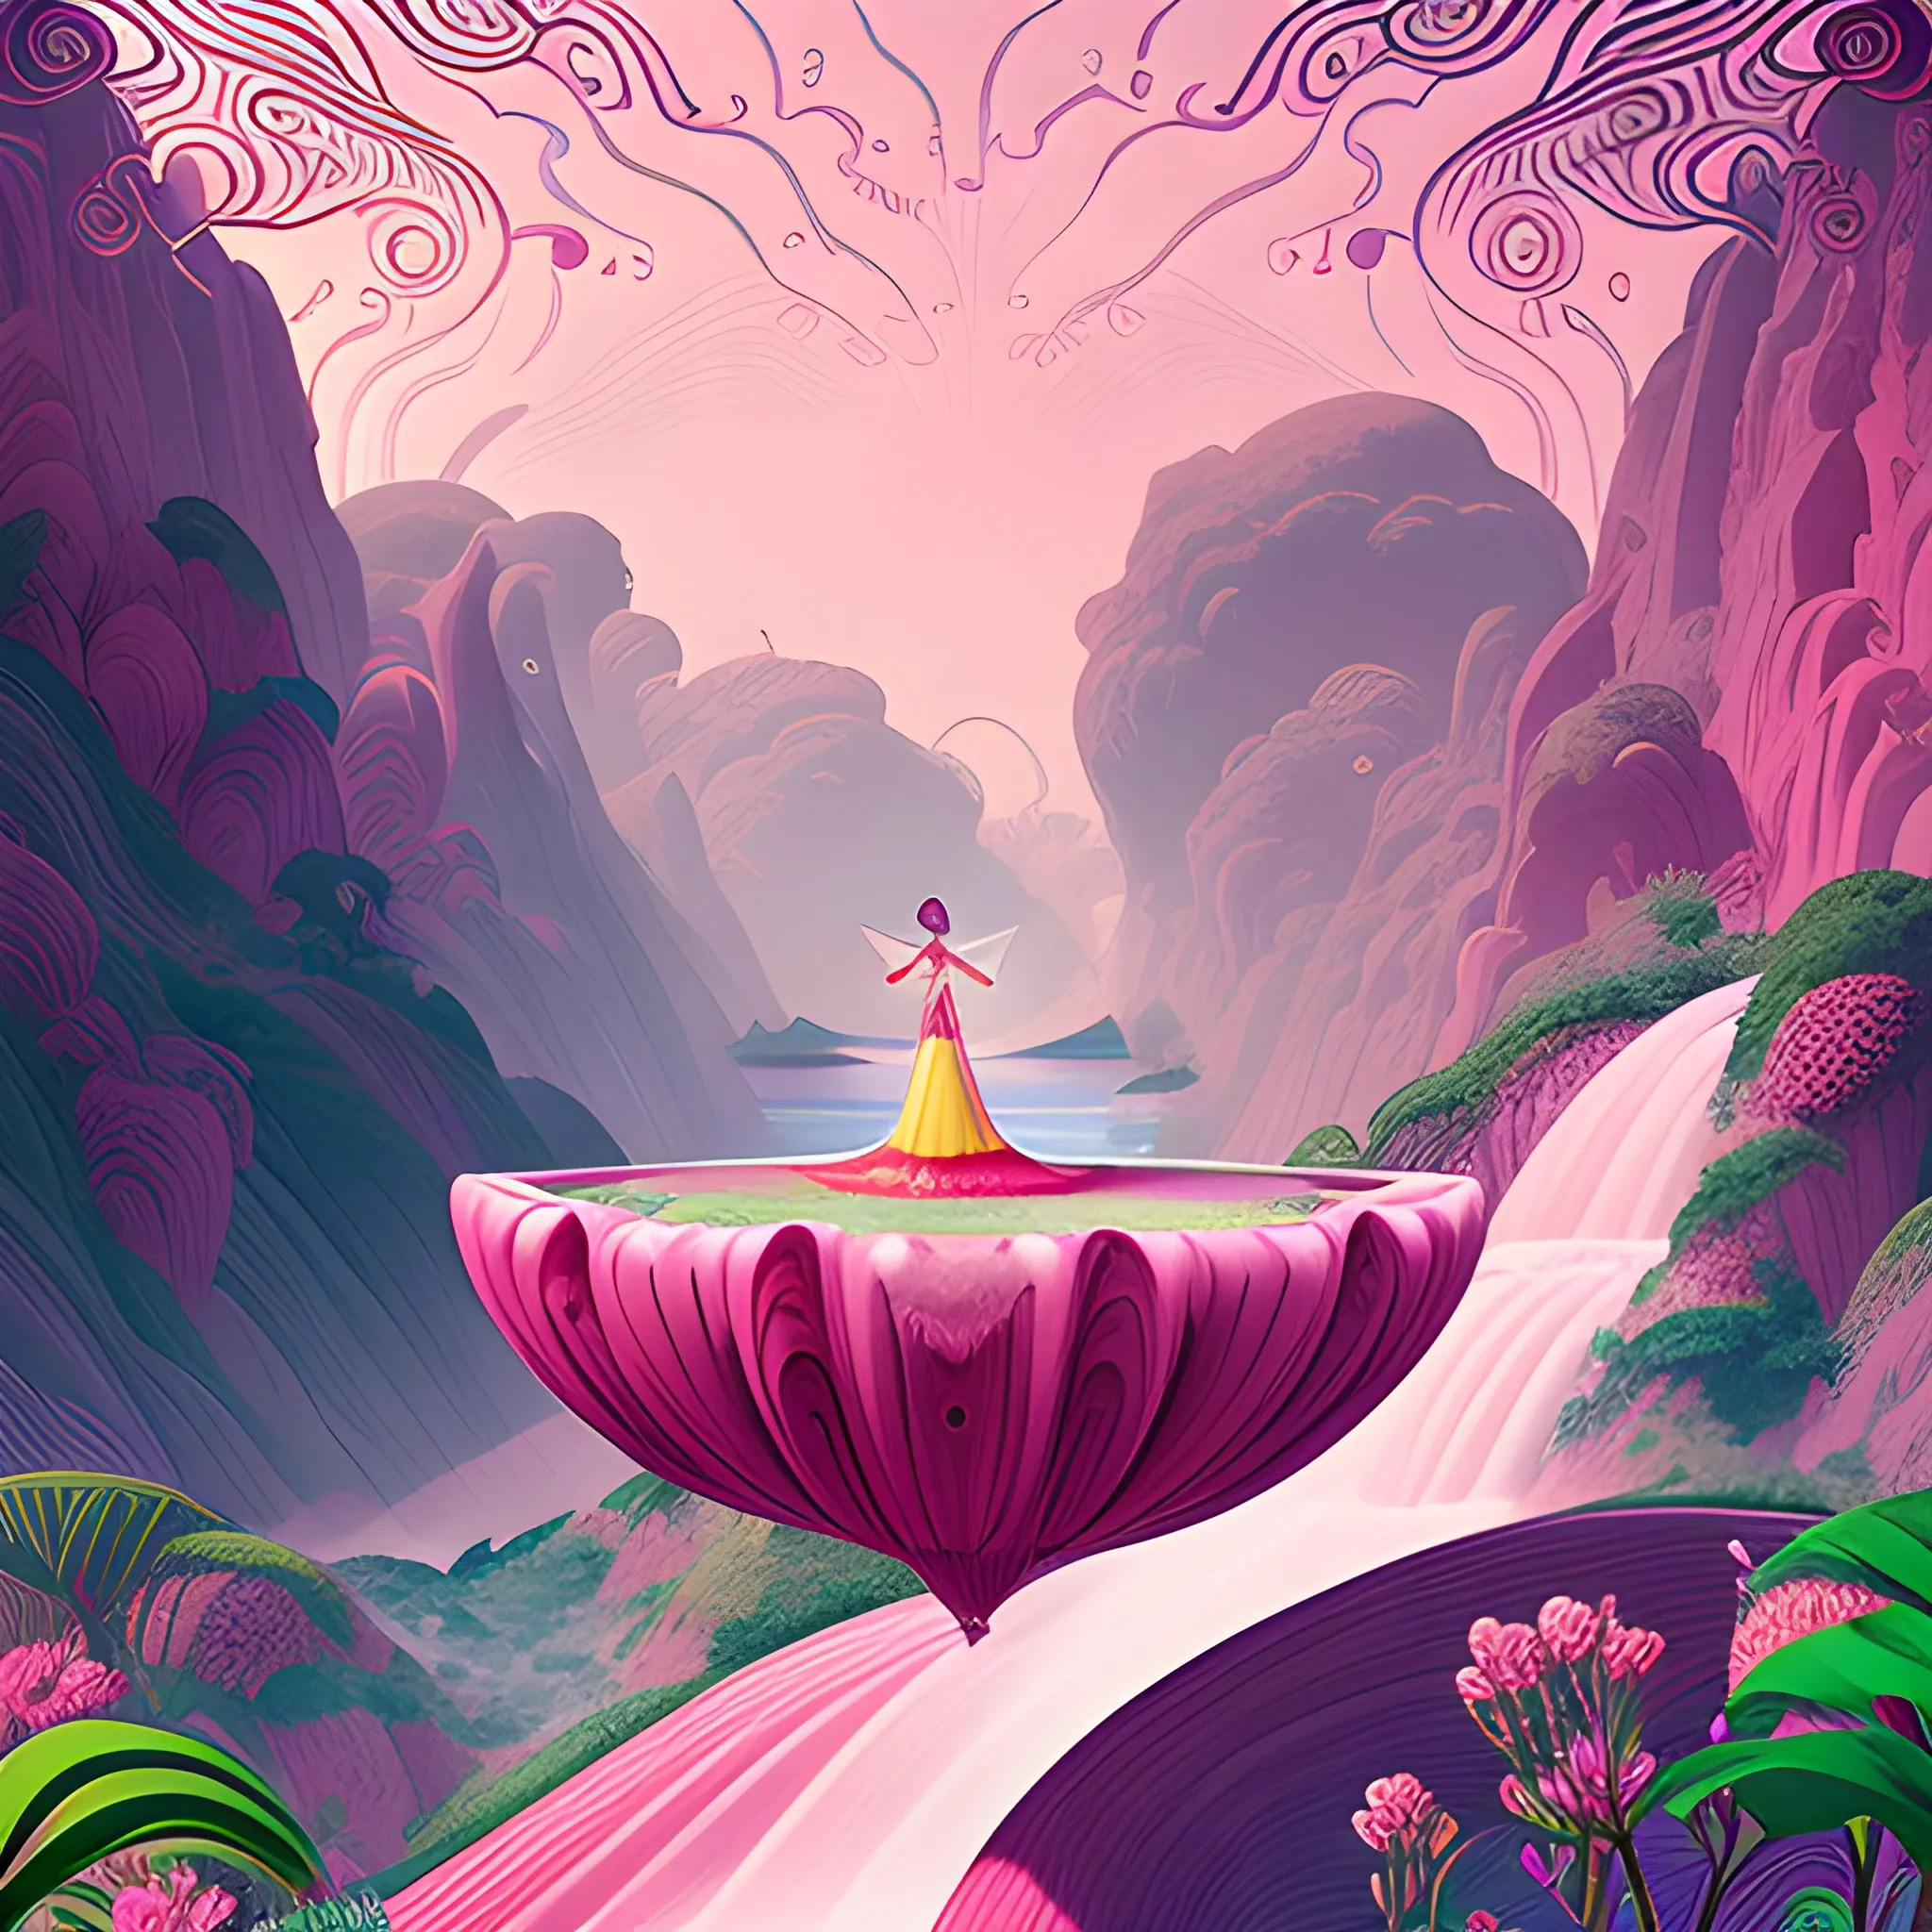 Woman wearing pink, art deco, earrings, digital illustration style, otherworldly landscape with floating islands, cascading streams and vibrant flora and fauna. Very detailed and high quality, 3D